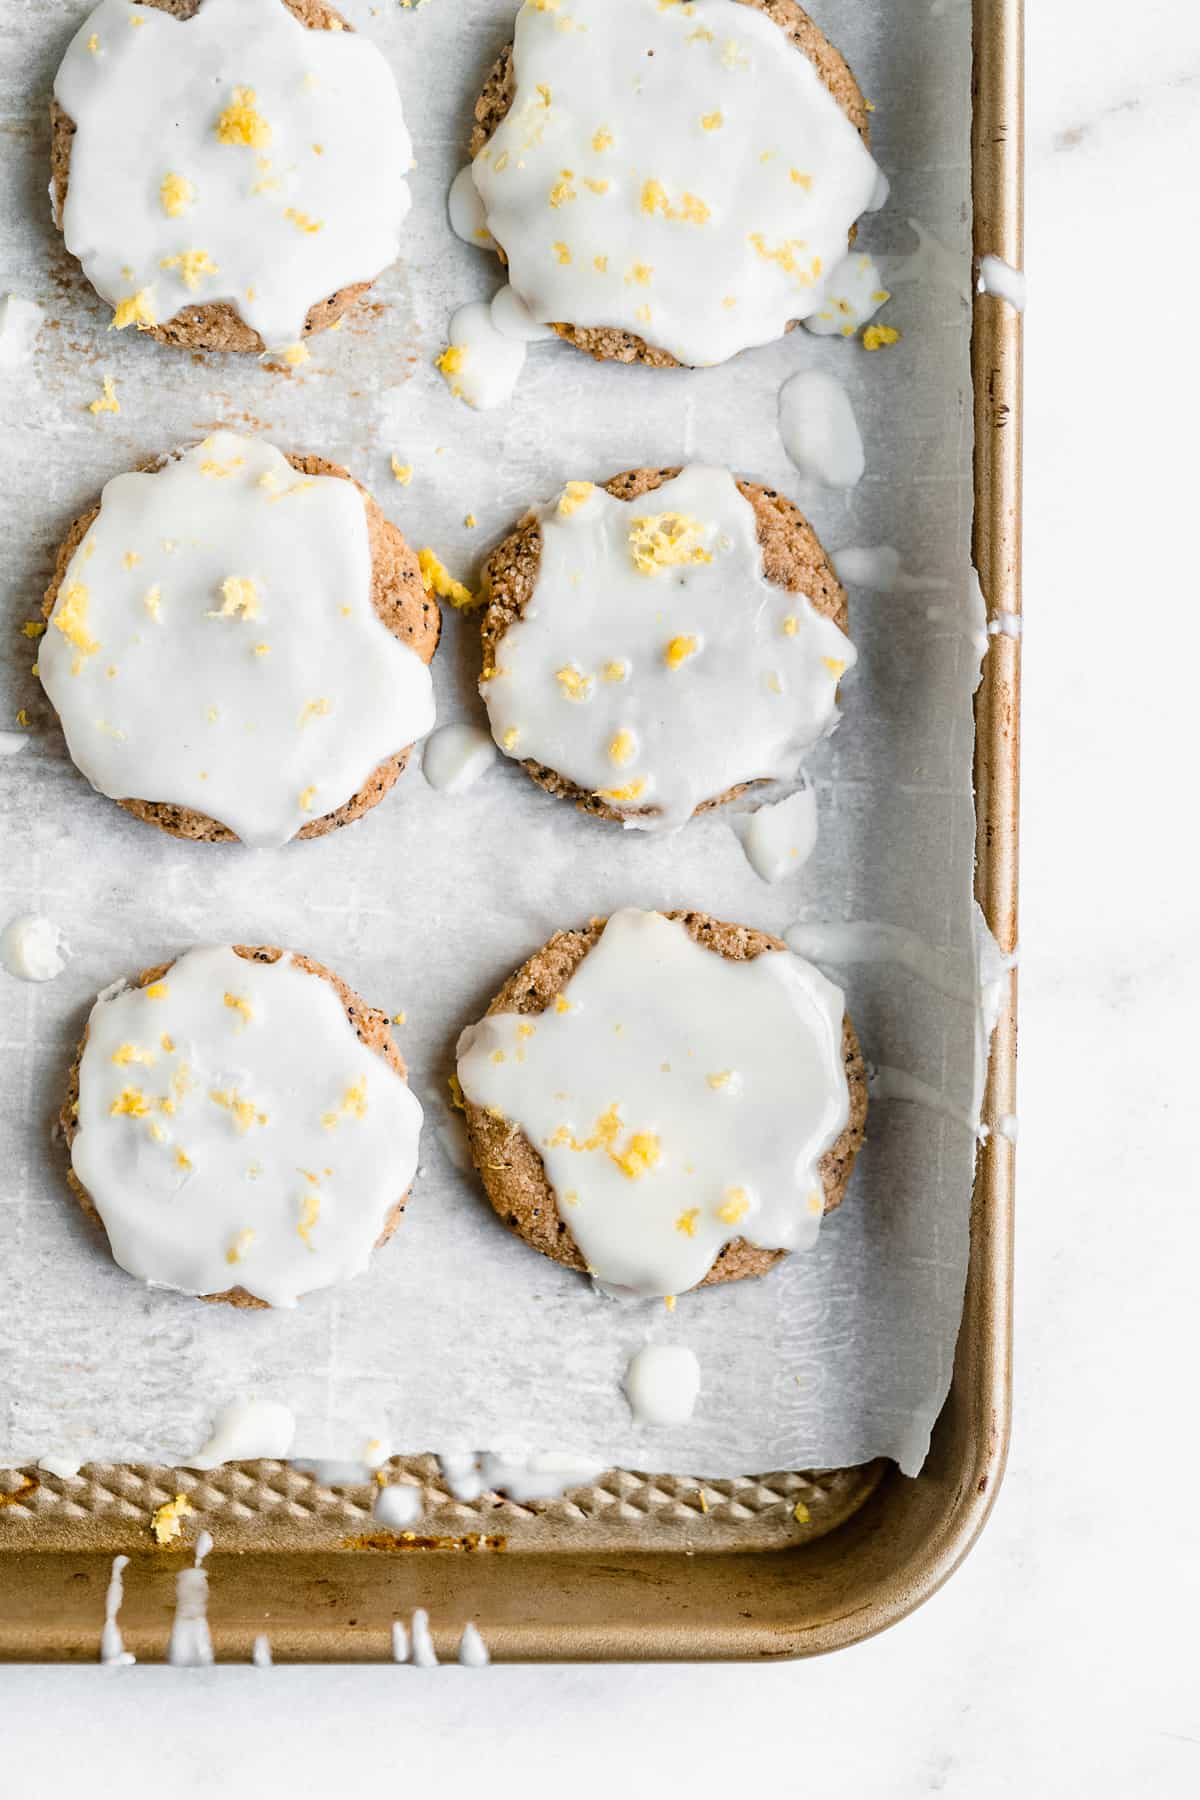 Overhead image of Paleo Lemon Poppy Seed Cookies on white parchment paper on a baking sheet.  